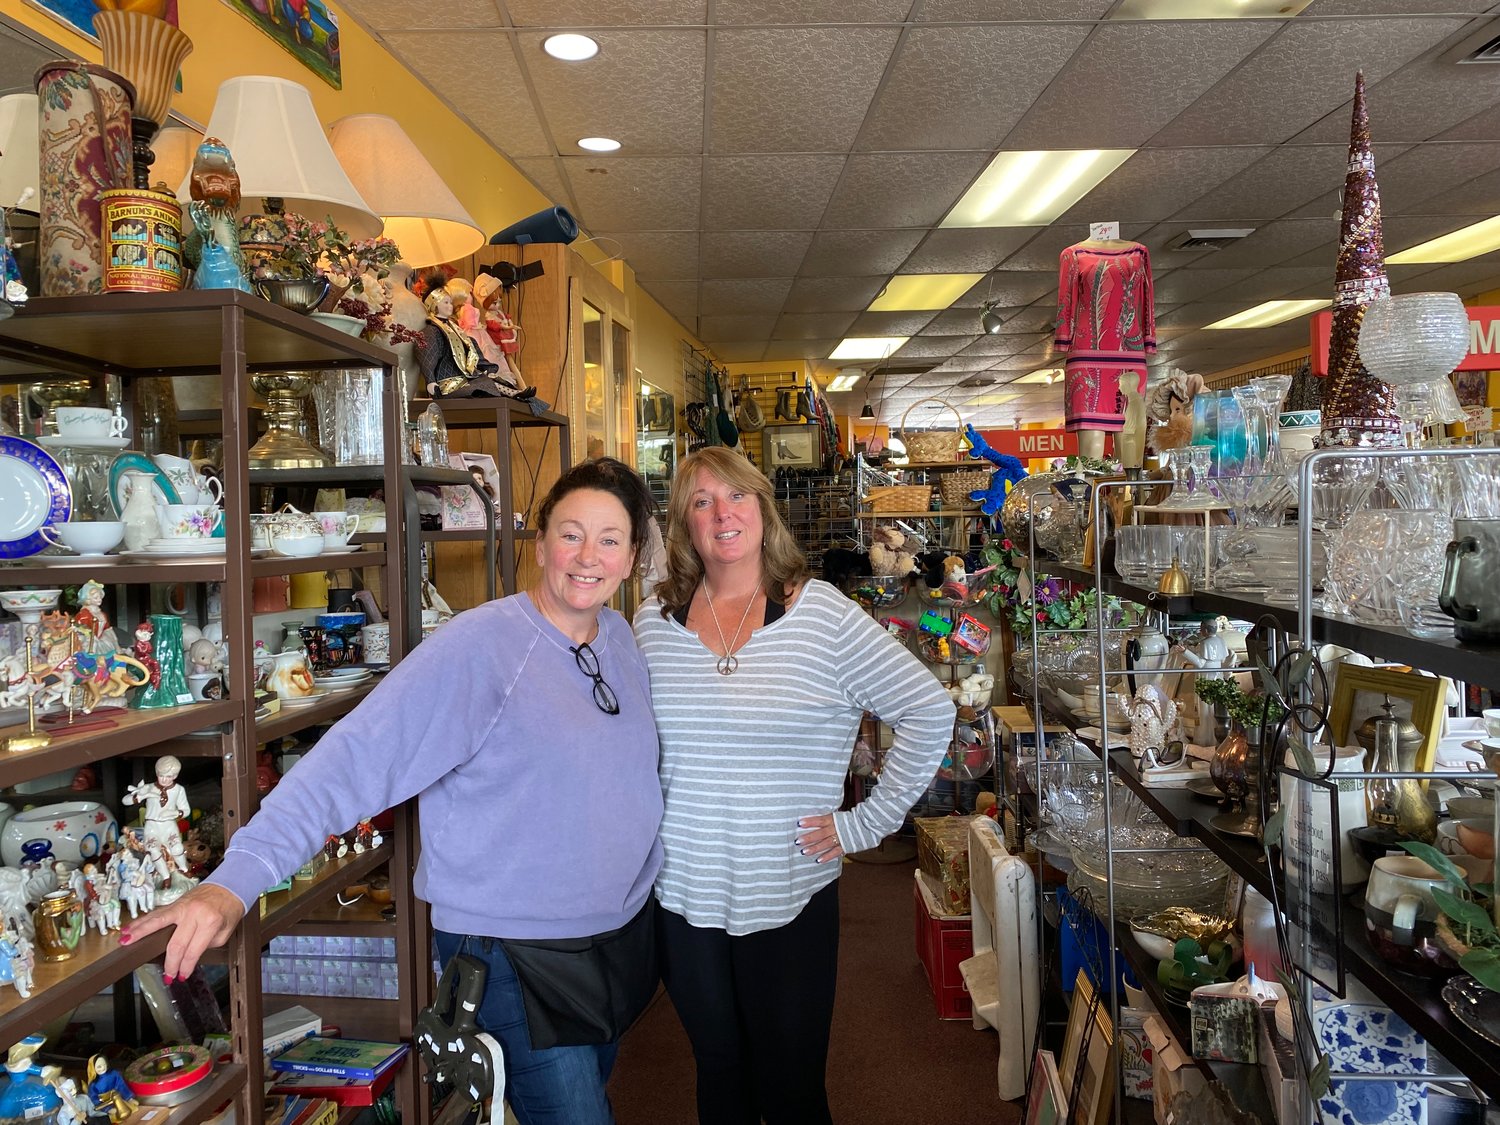 Deirdre Stammers, owner of Glorybeezzz Thrift with a Twist, with employee Liz Hastings, said she welcomed the Grand at Baldwin development because it would increase foot traffic and bring new merchants to Baldwin.